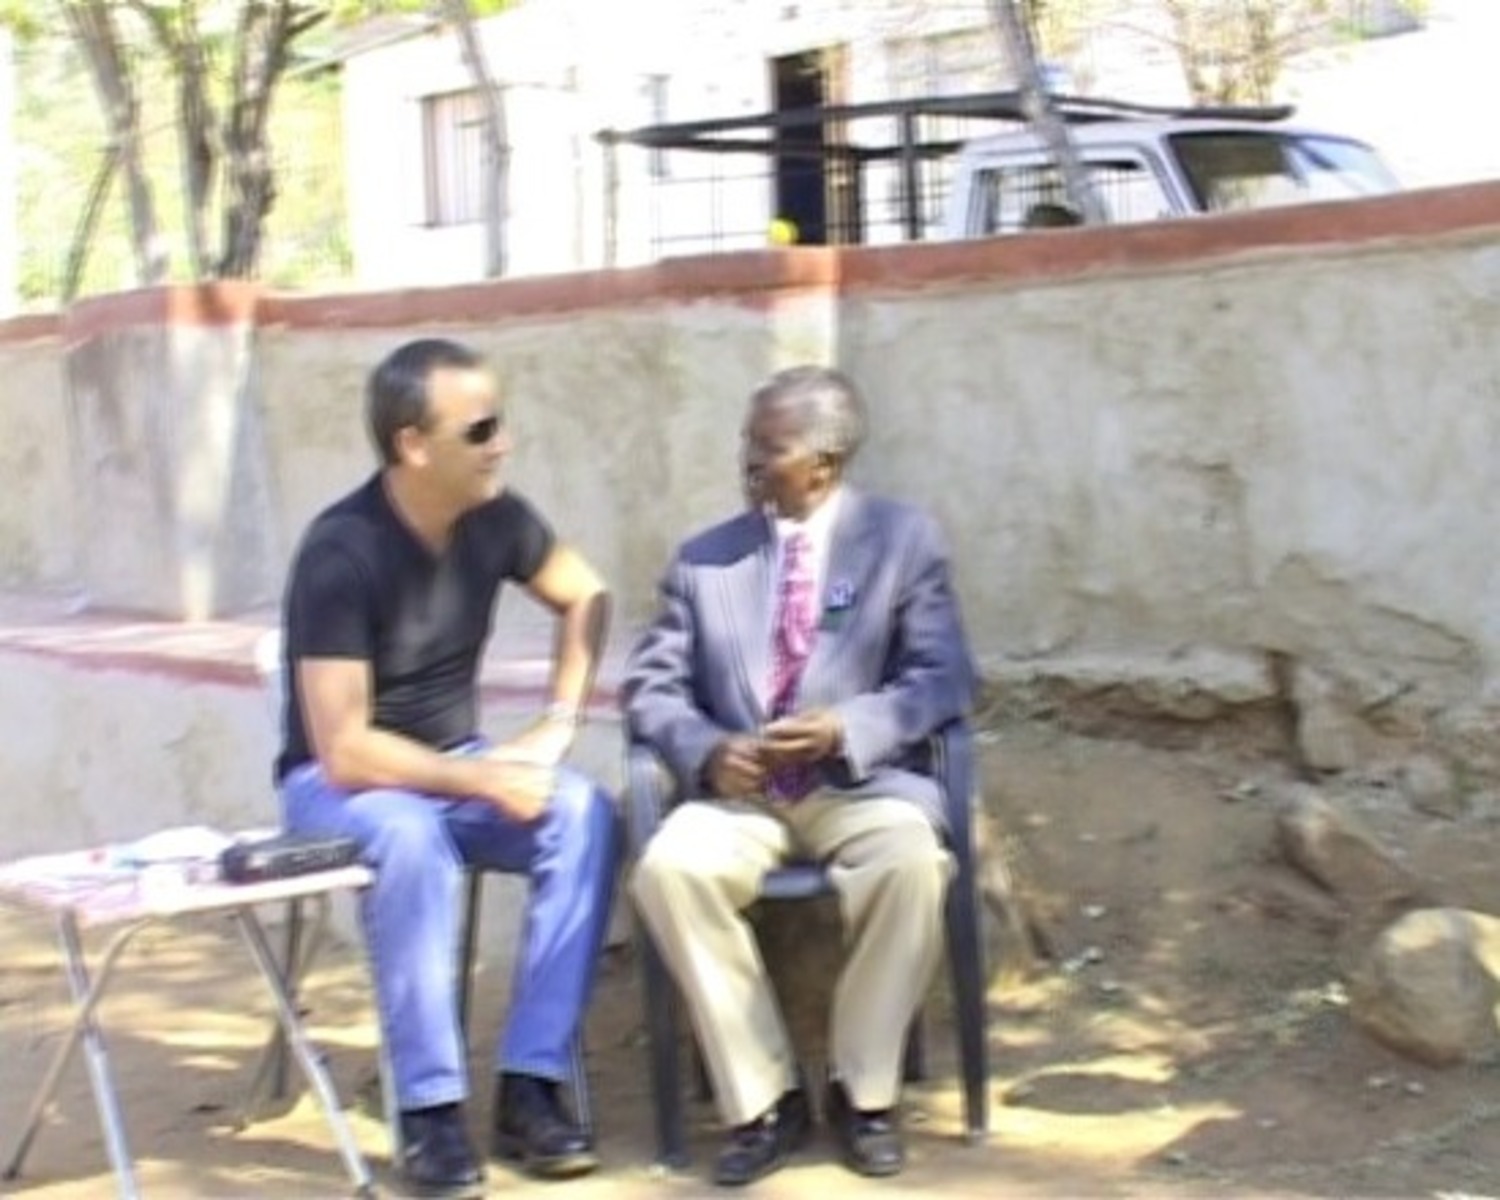 Sonias Vilakazi, chief of the Matimatsatsi community in Maandagshoek, and Dale McKinley engage in dialogue during an oral history interview for SAHA\'s Alternative History Project.